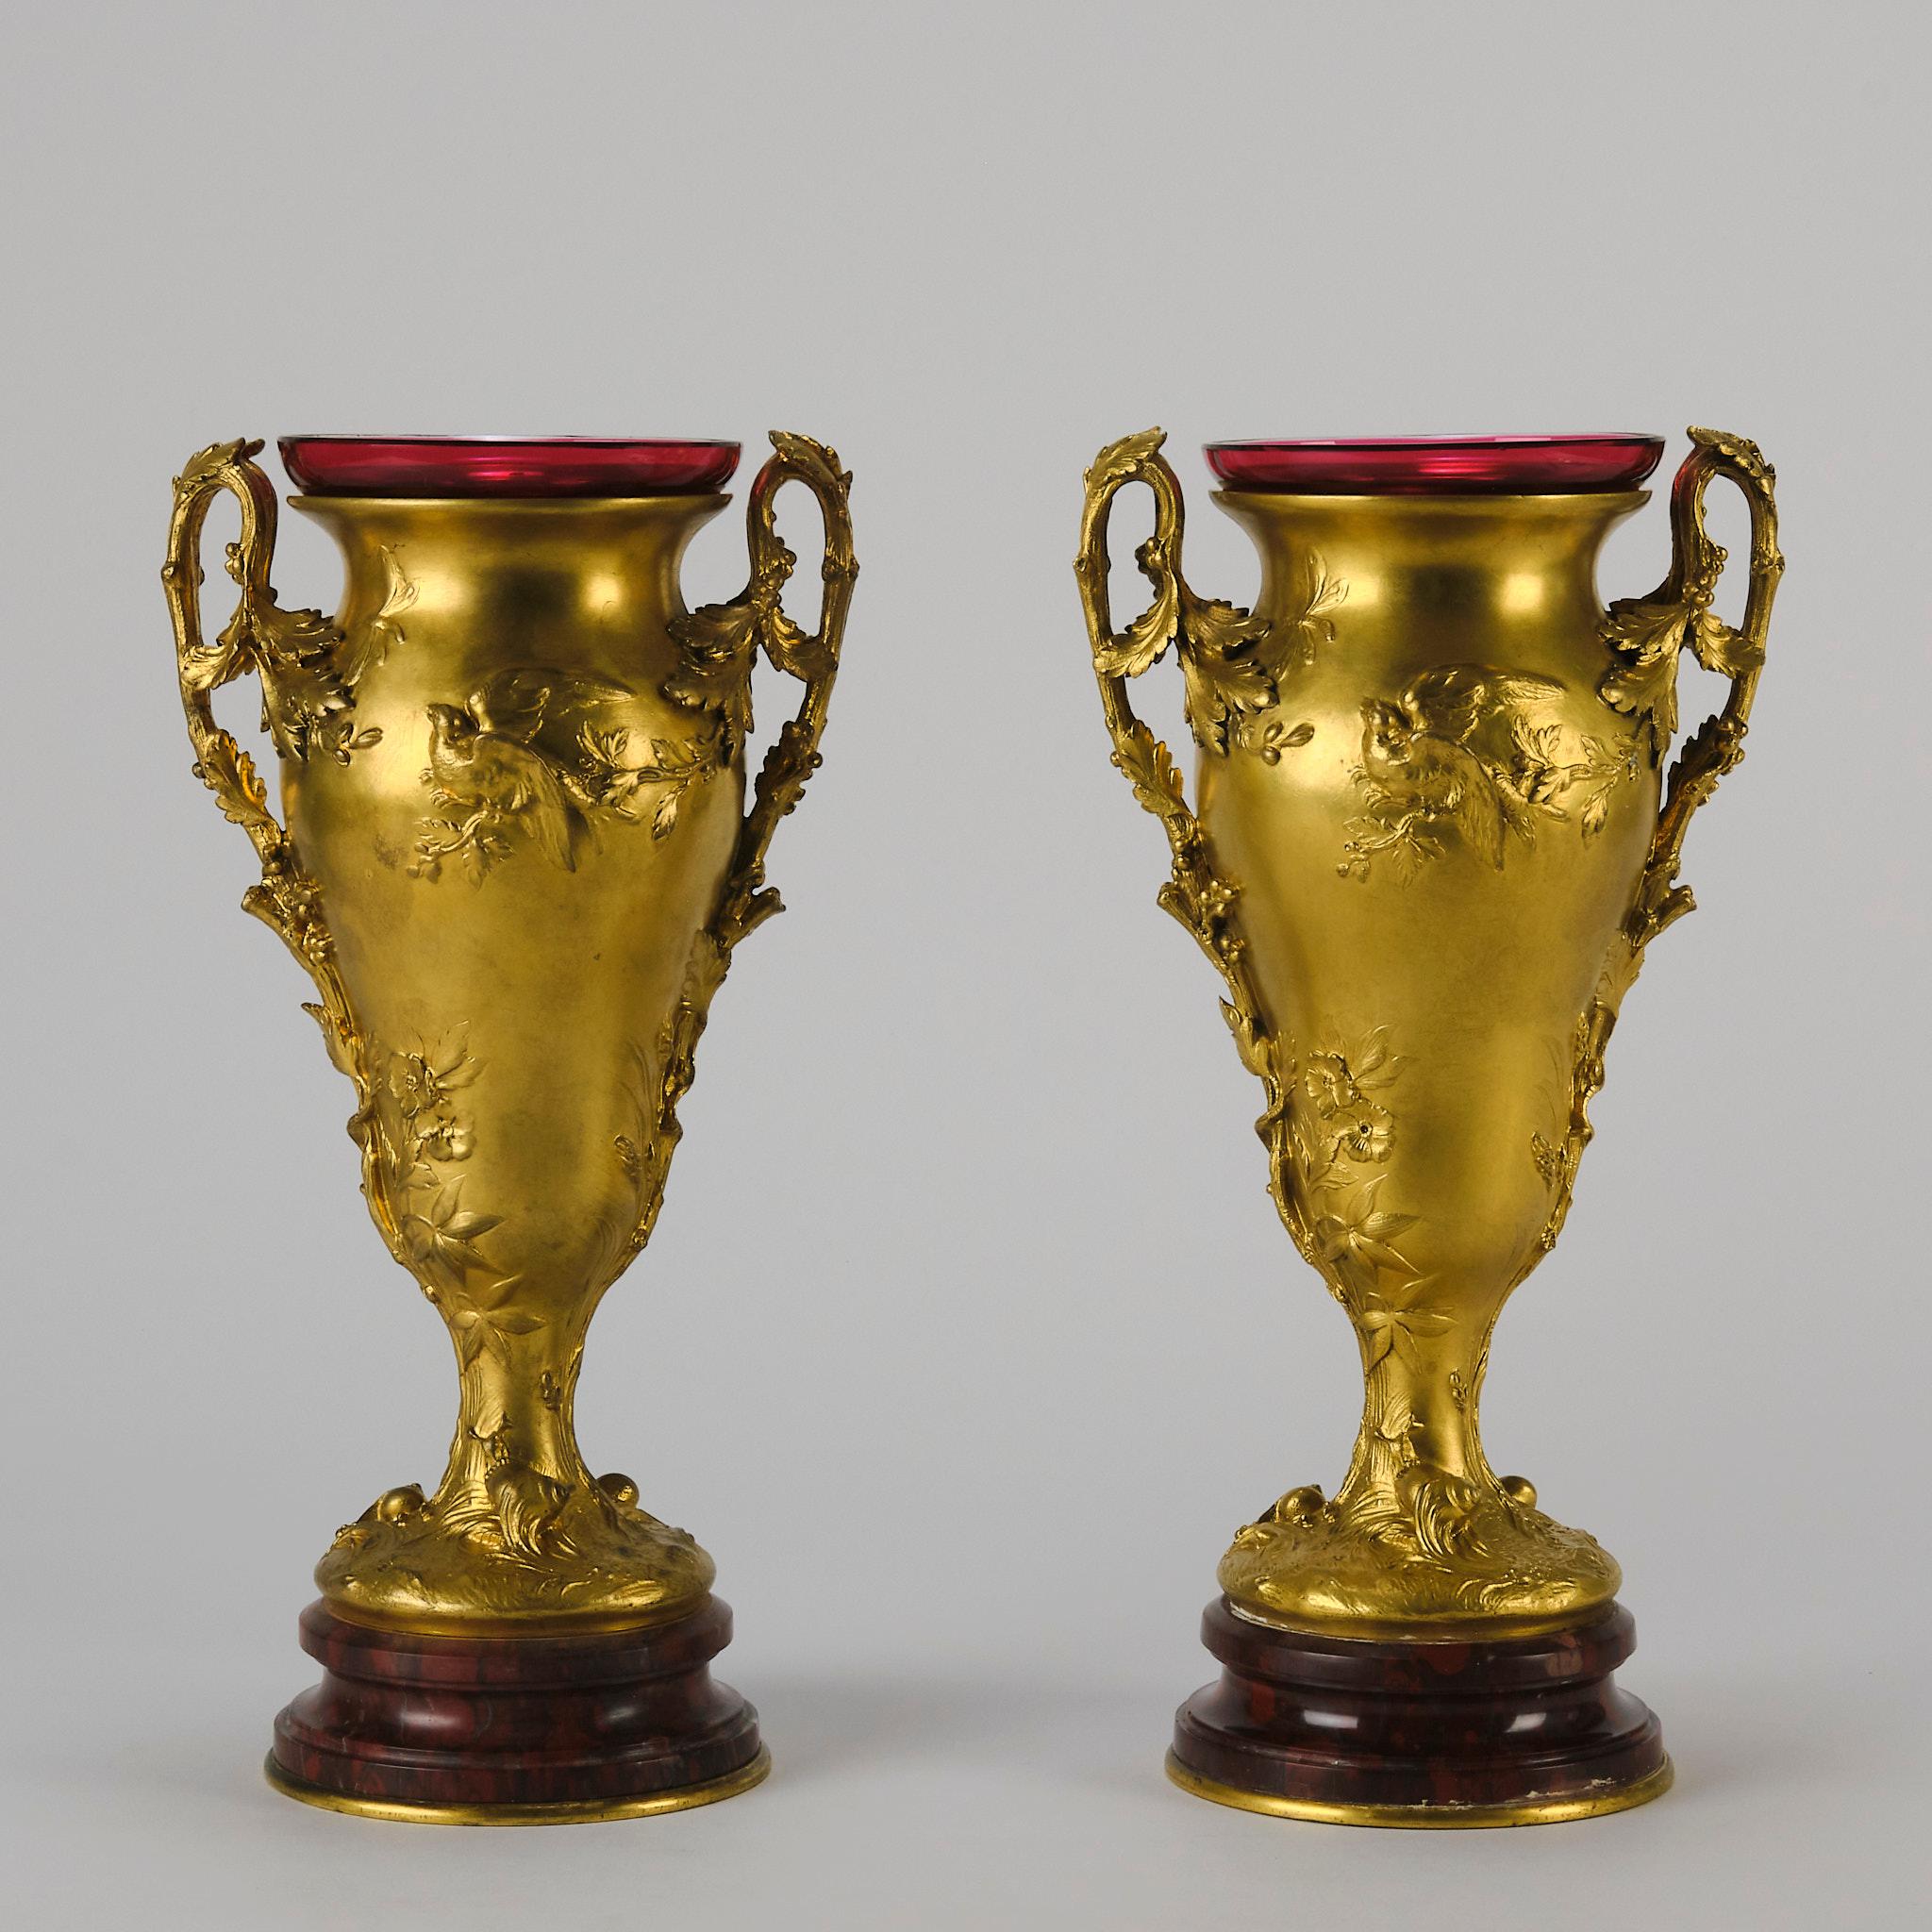 A highly attractive pair of late 19th century gilt bronze twin handled vases. The handles in the form of twisted vines and the vases decorated with butterflies and birds with snails around the bases. The tops complete with cranberry red glass